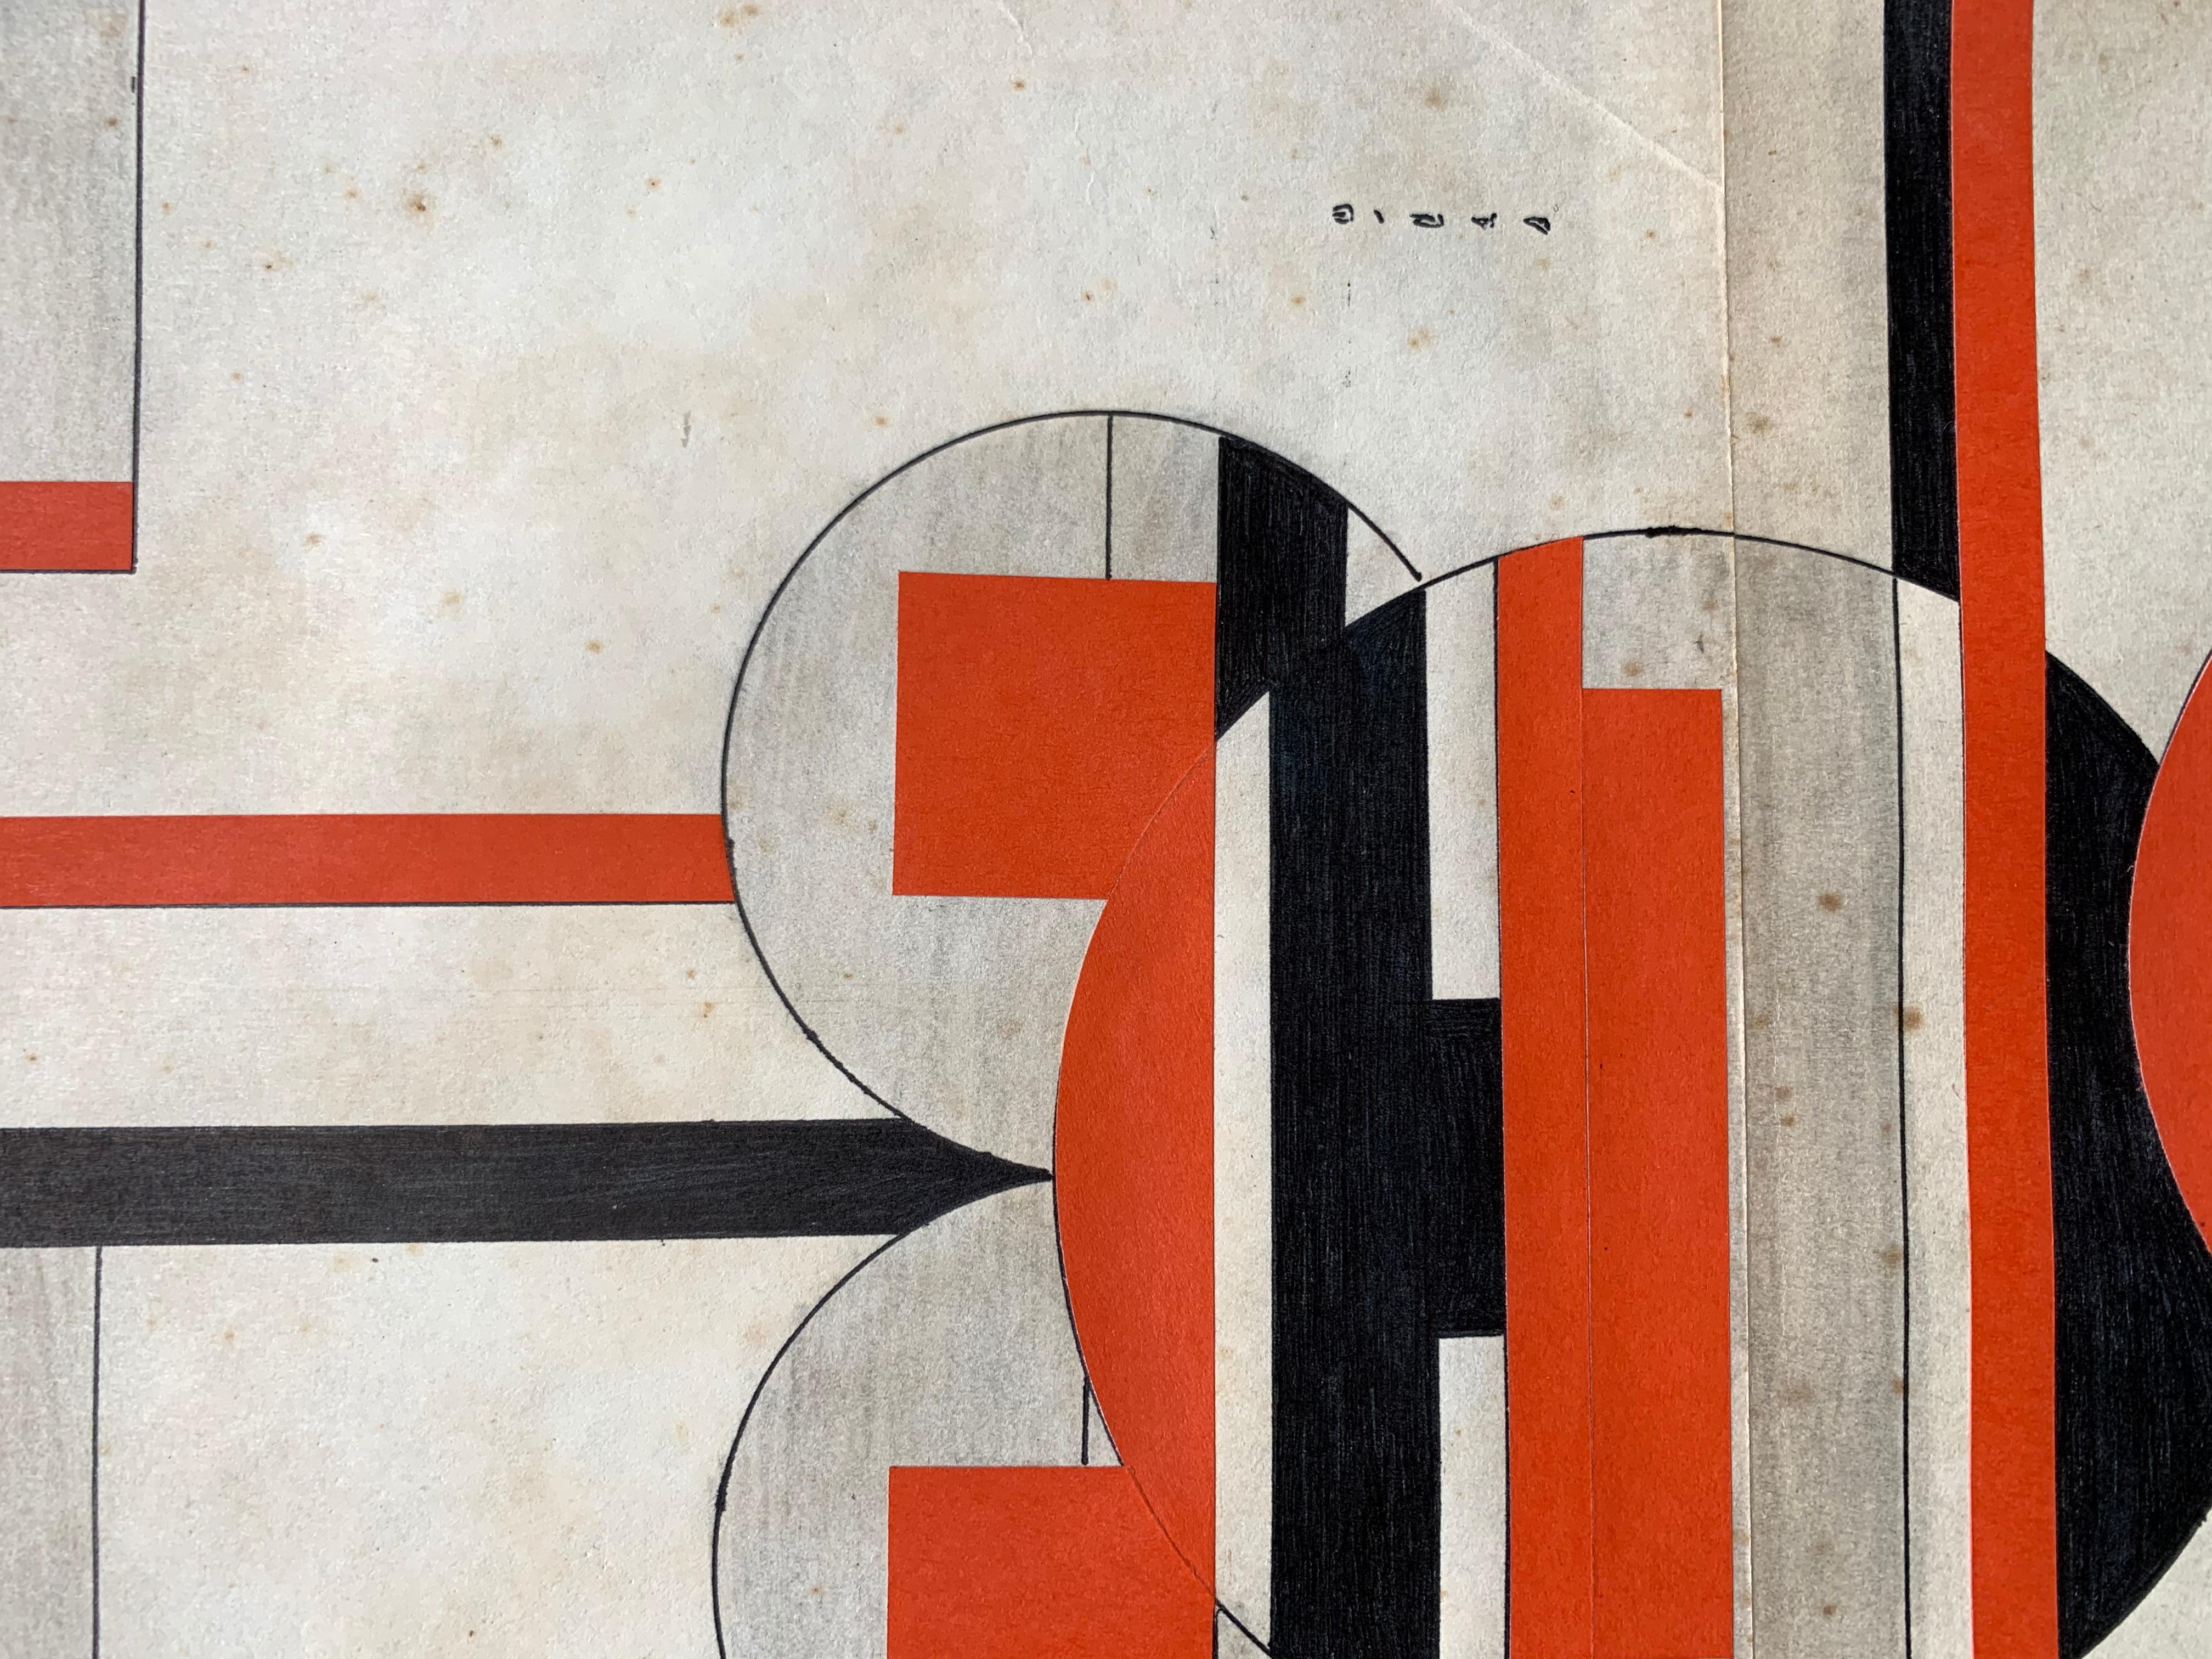 Abstract geometric composition by Cuban artist, Sandu Darie (1908-1991). Untitled, ca. 1960. Ink, paint and paper collage on folded paper sheet measuring 9 x 29 inches. Framed measurement: 16 x 36.5 inches. Signed in multiple areas. The piece is